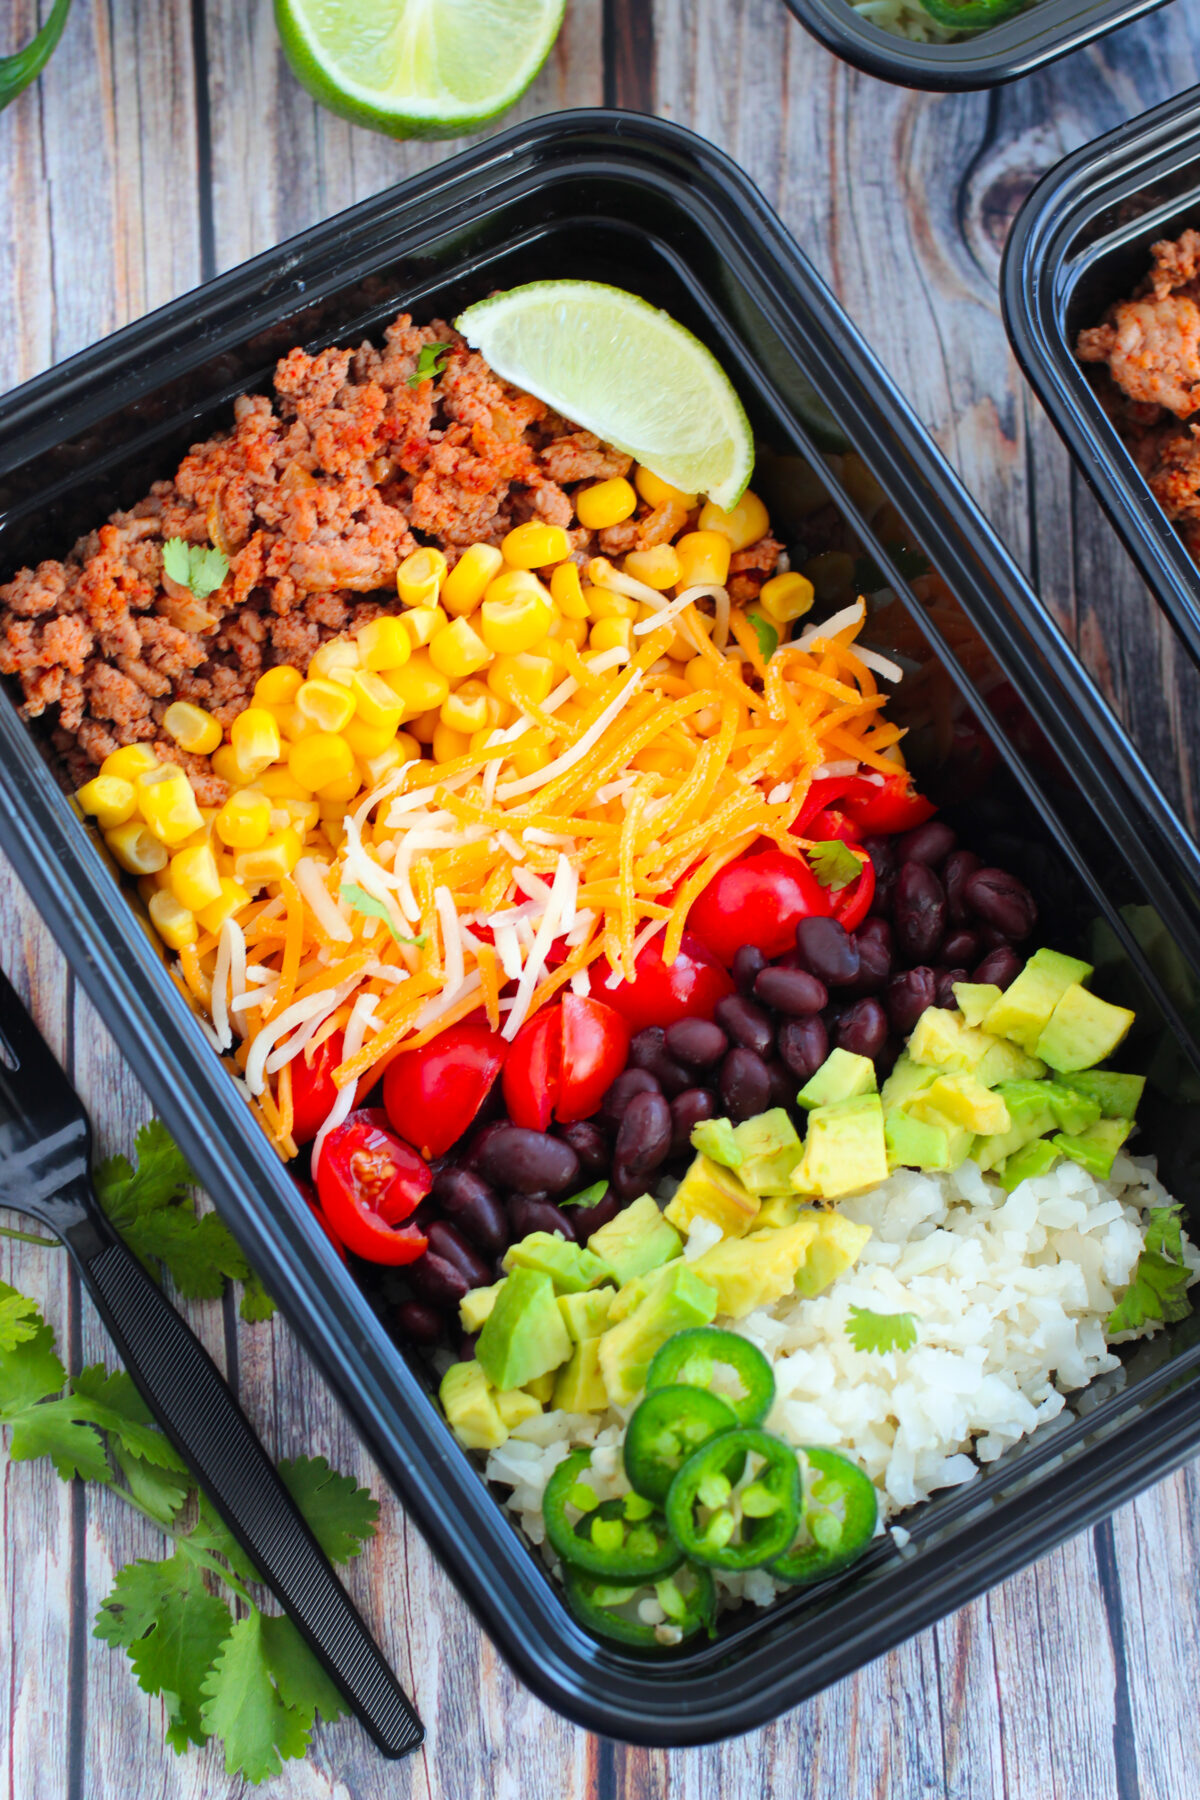 Love Mexican food? These turkey burrito meal prep bowls are perfect for you! They're healthy, delicious, and easy to make.